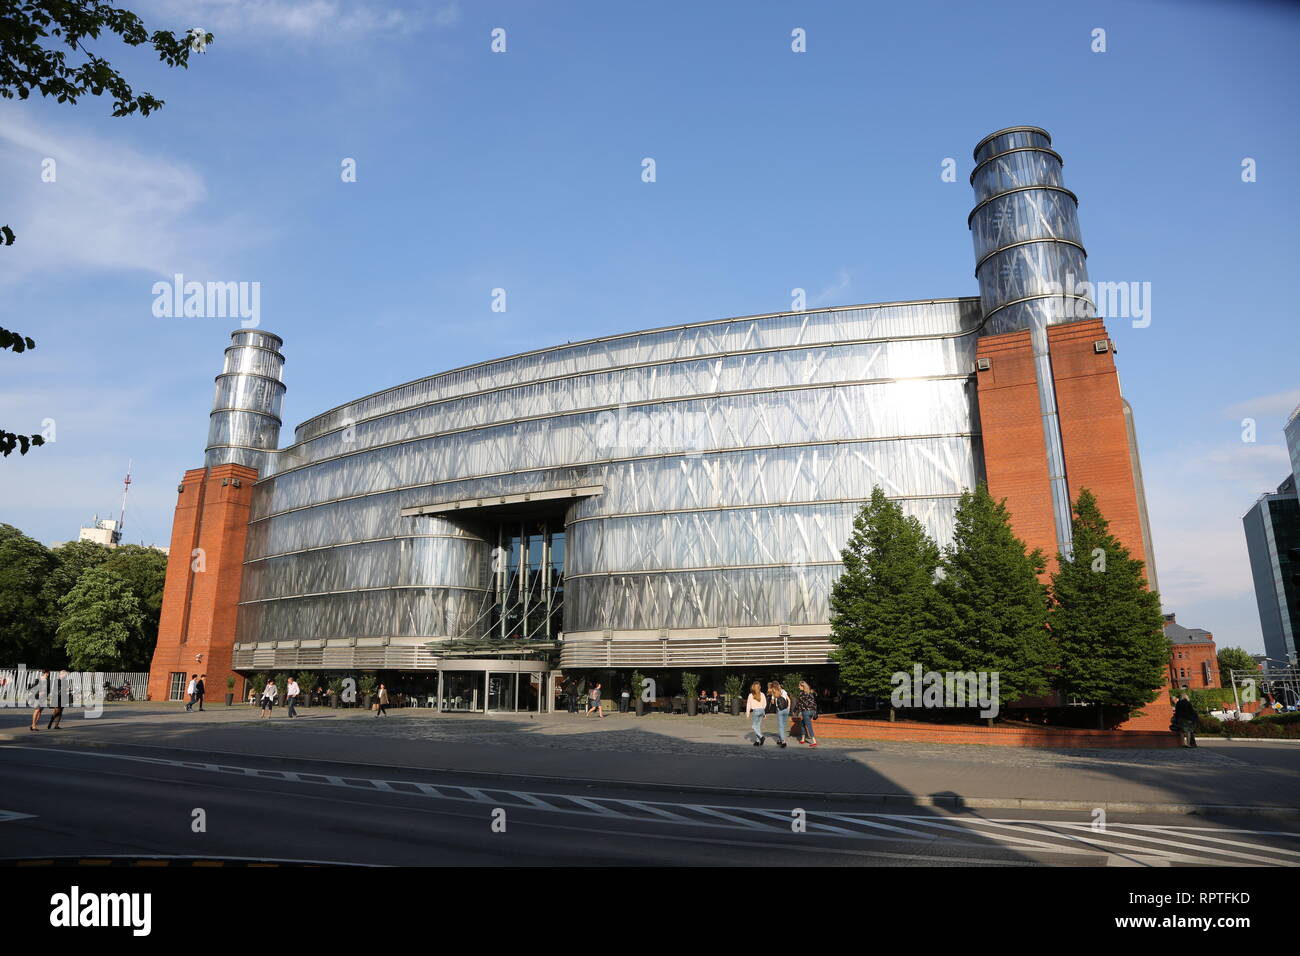 A general view of the Stary Browar trade and art centre, located in the centre of Poznan, Poland Stock Photo